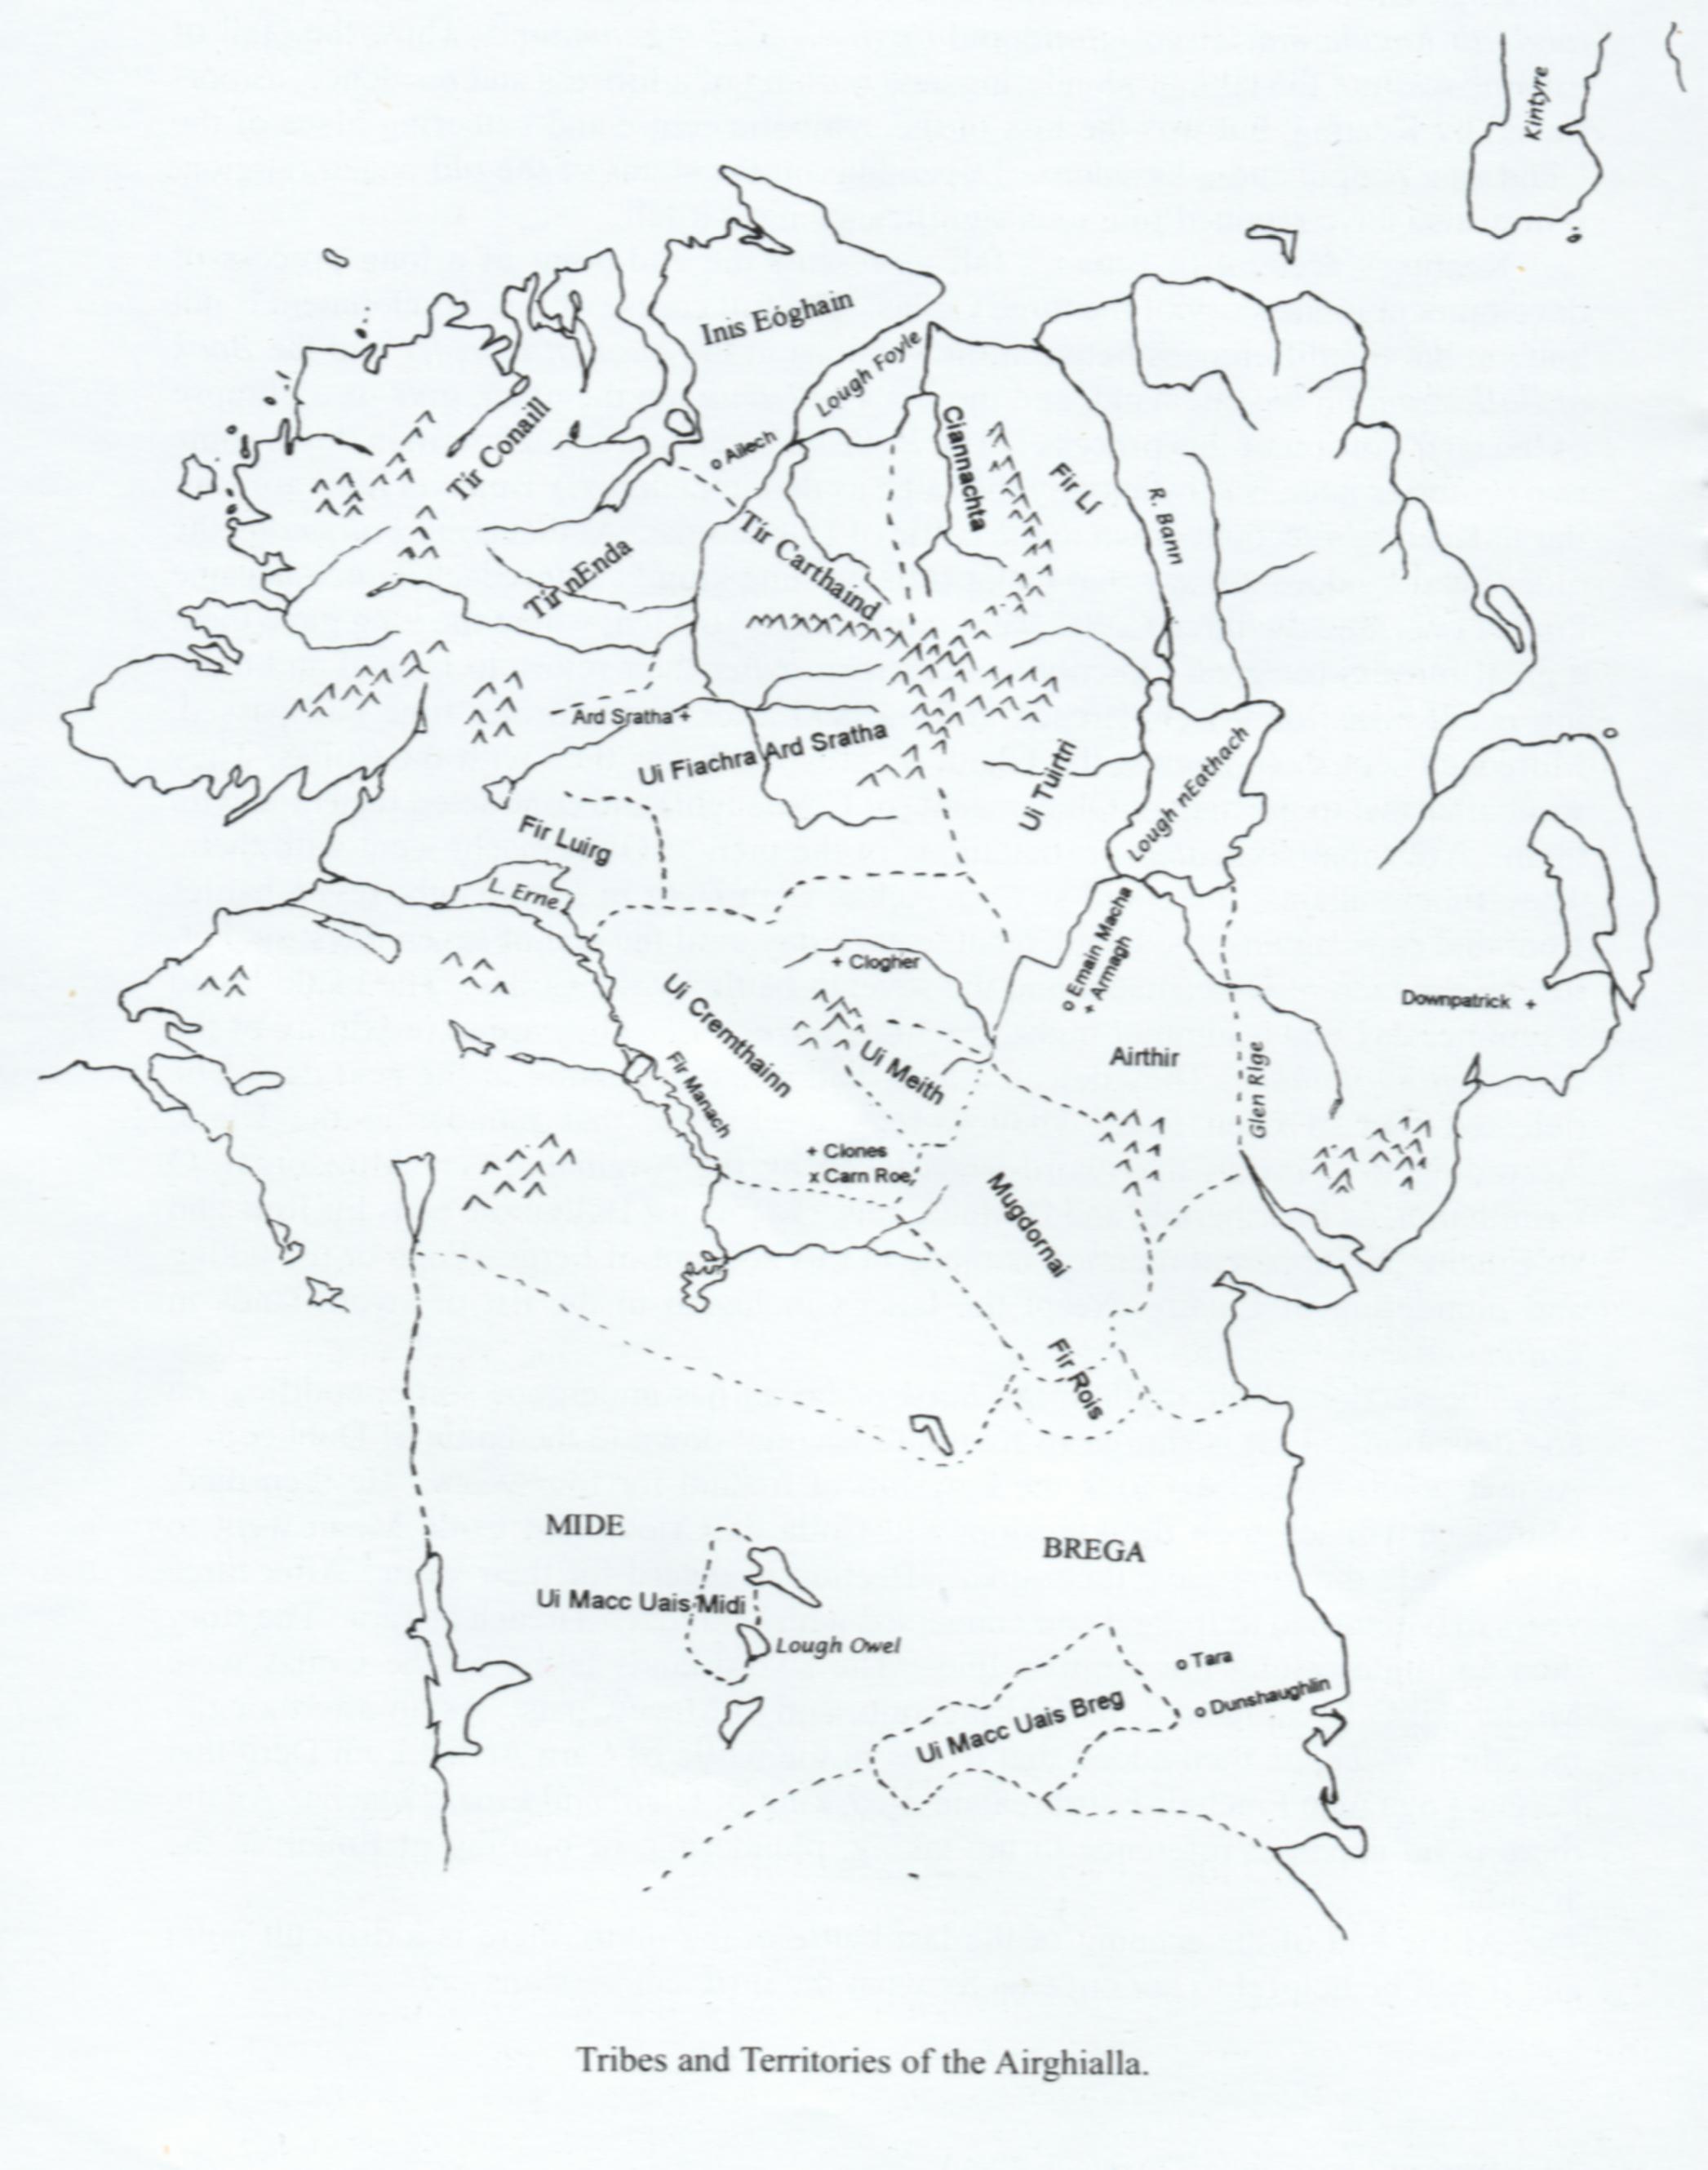 Map of Airghialla, copyright Donald M. Schlegel, used with permission